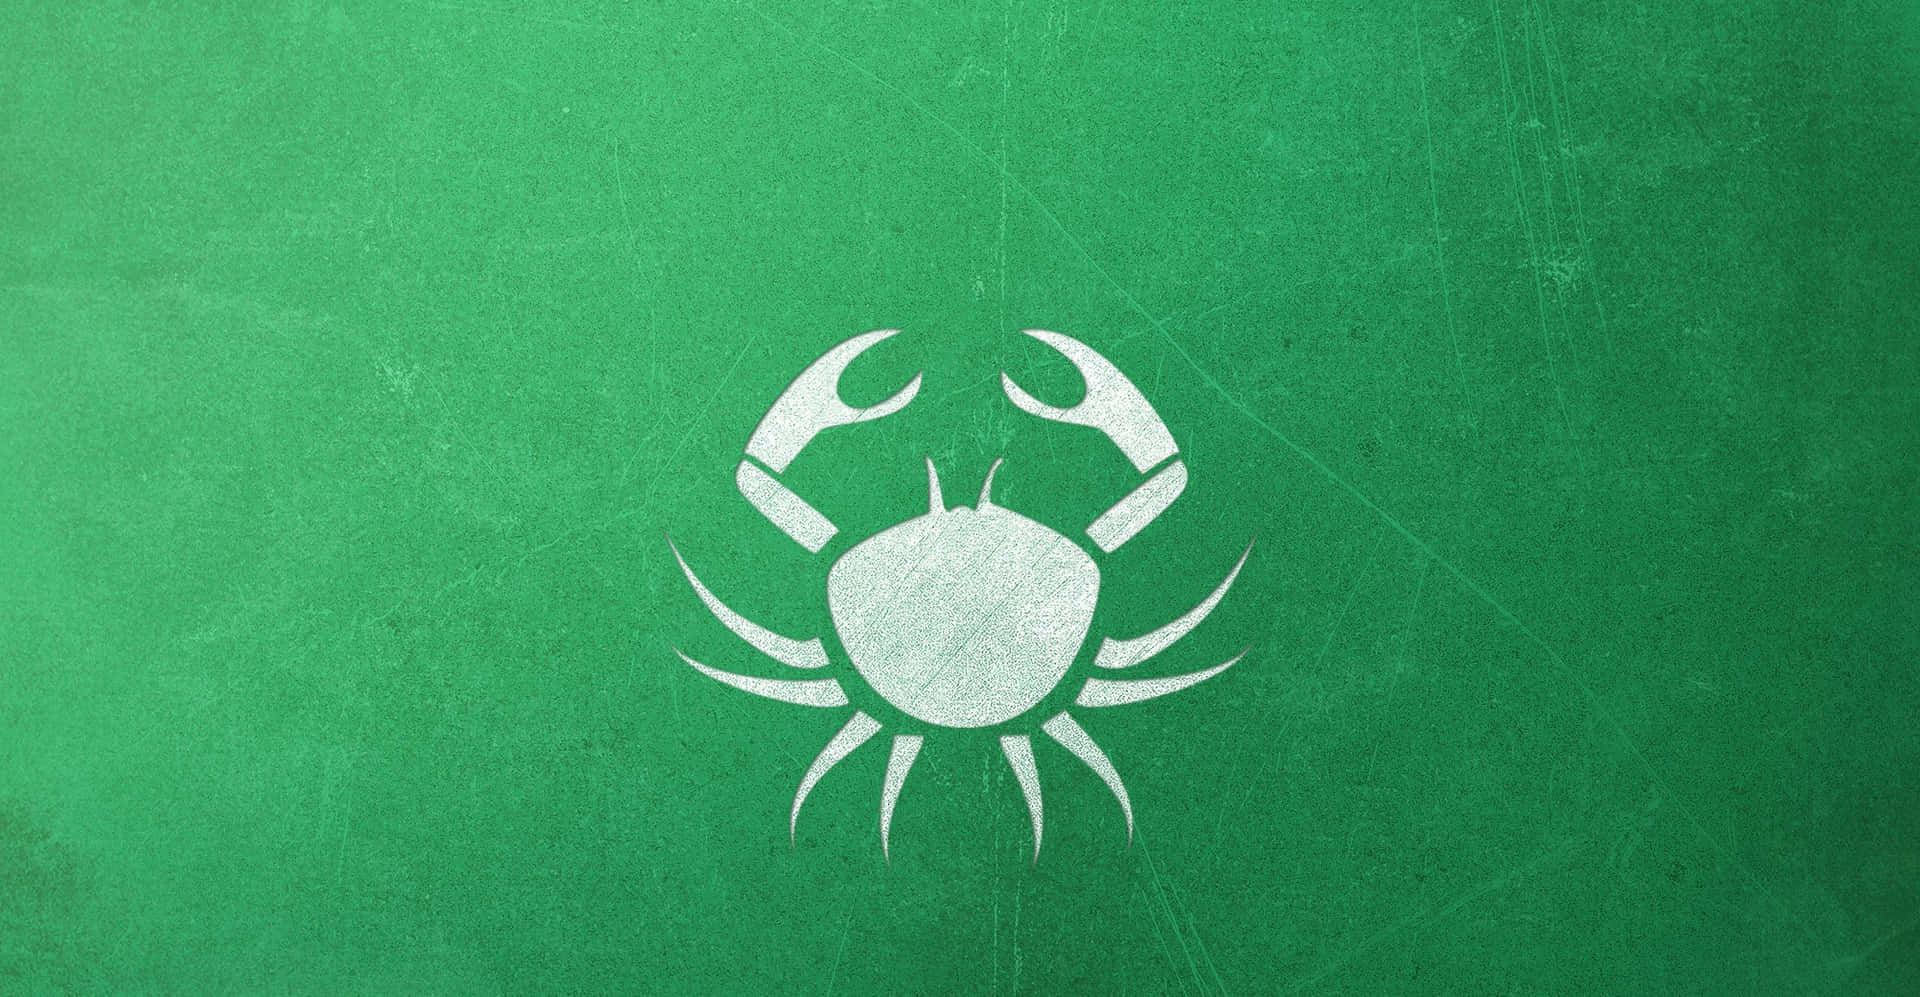 A Crab Logo On A Green Background